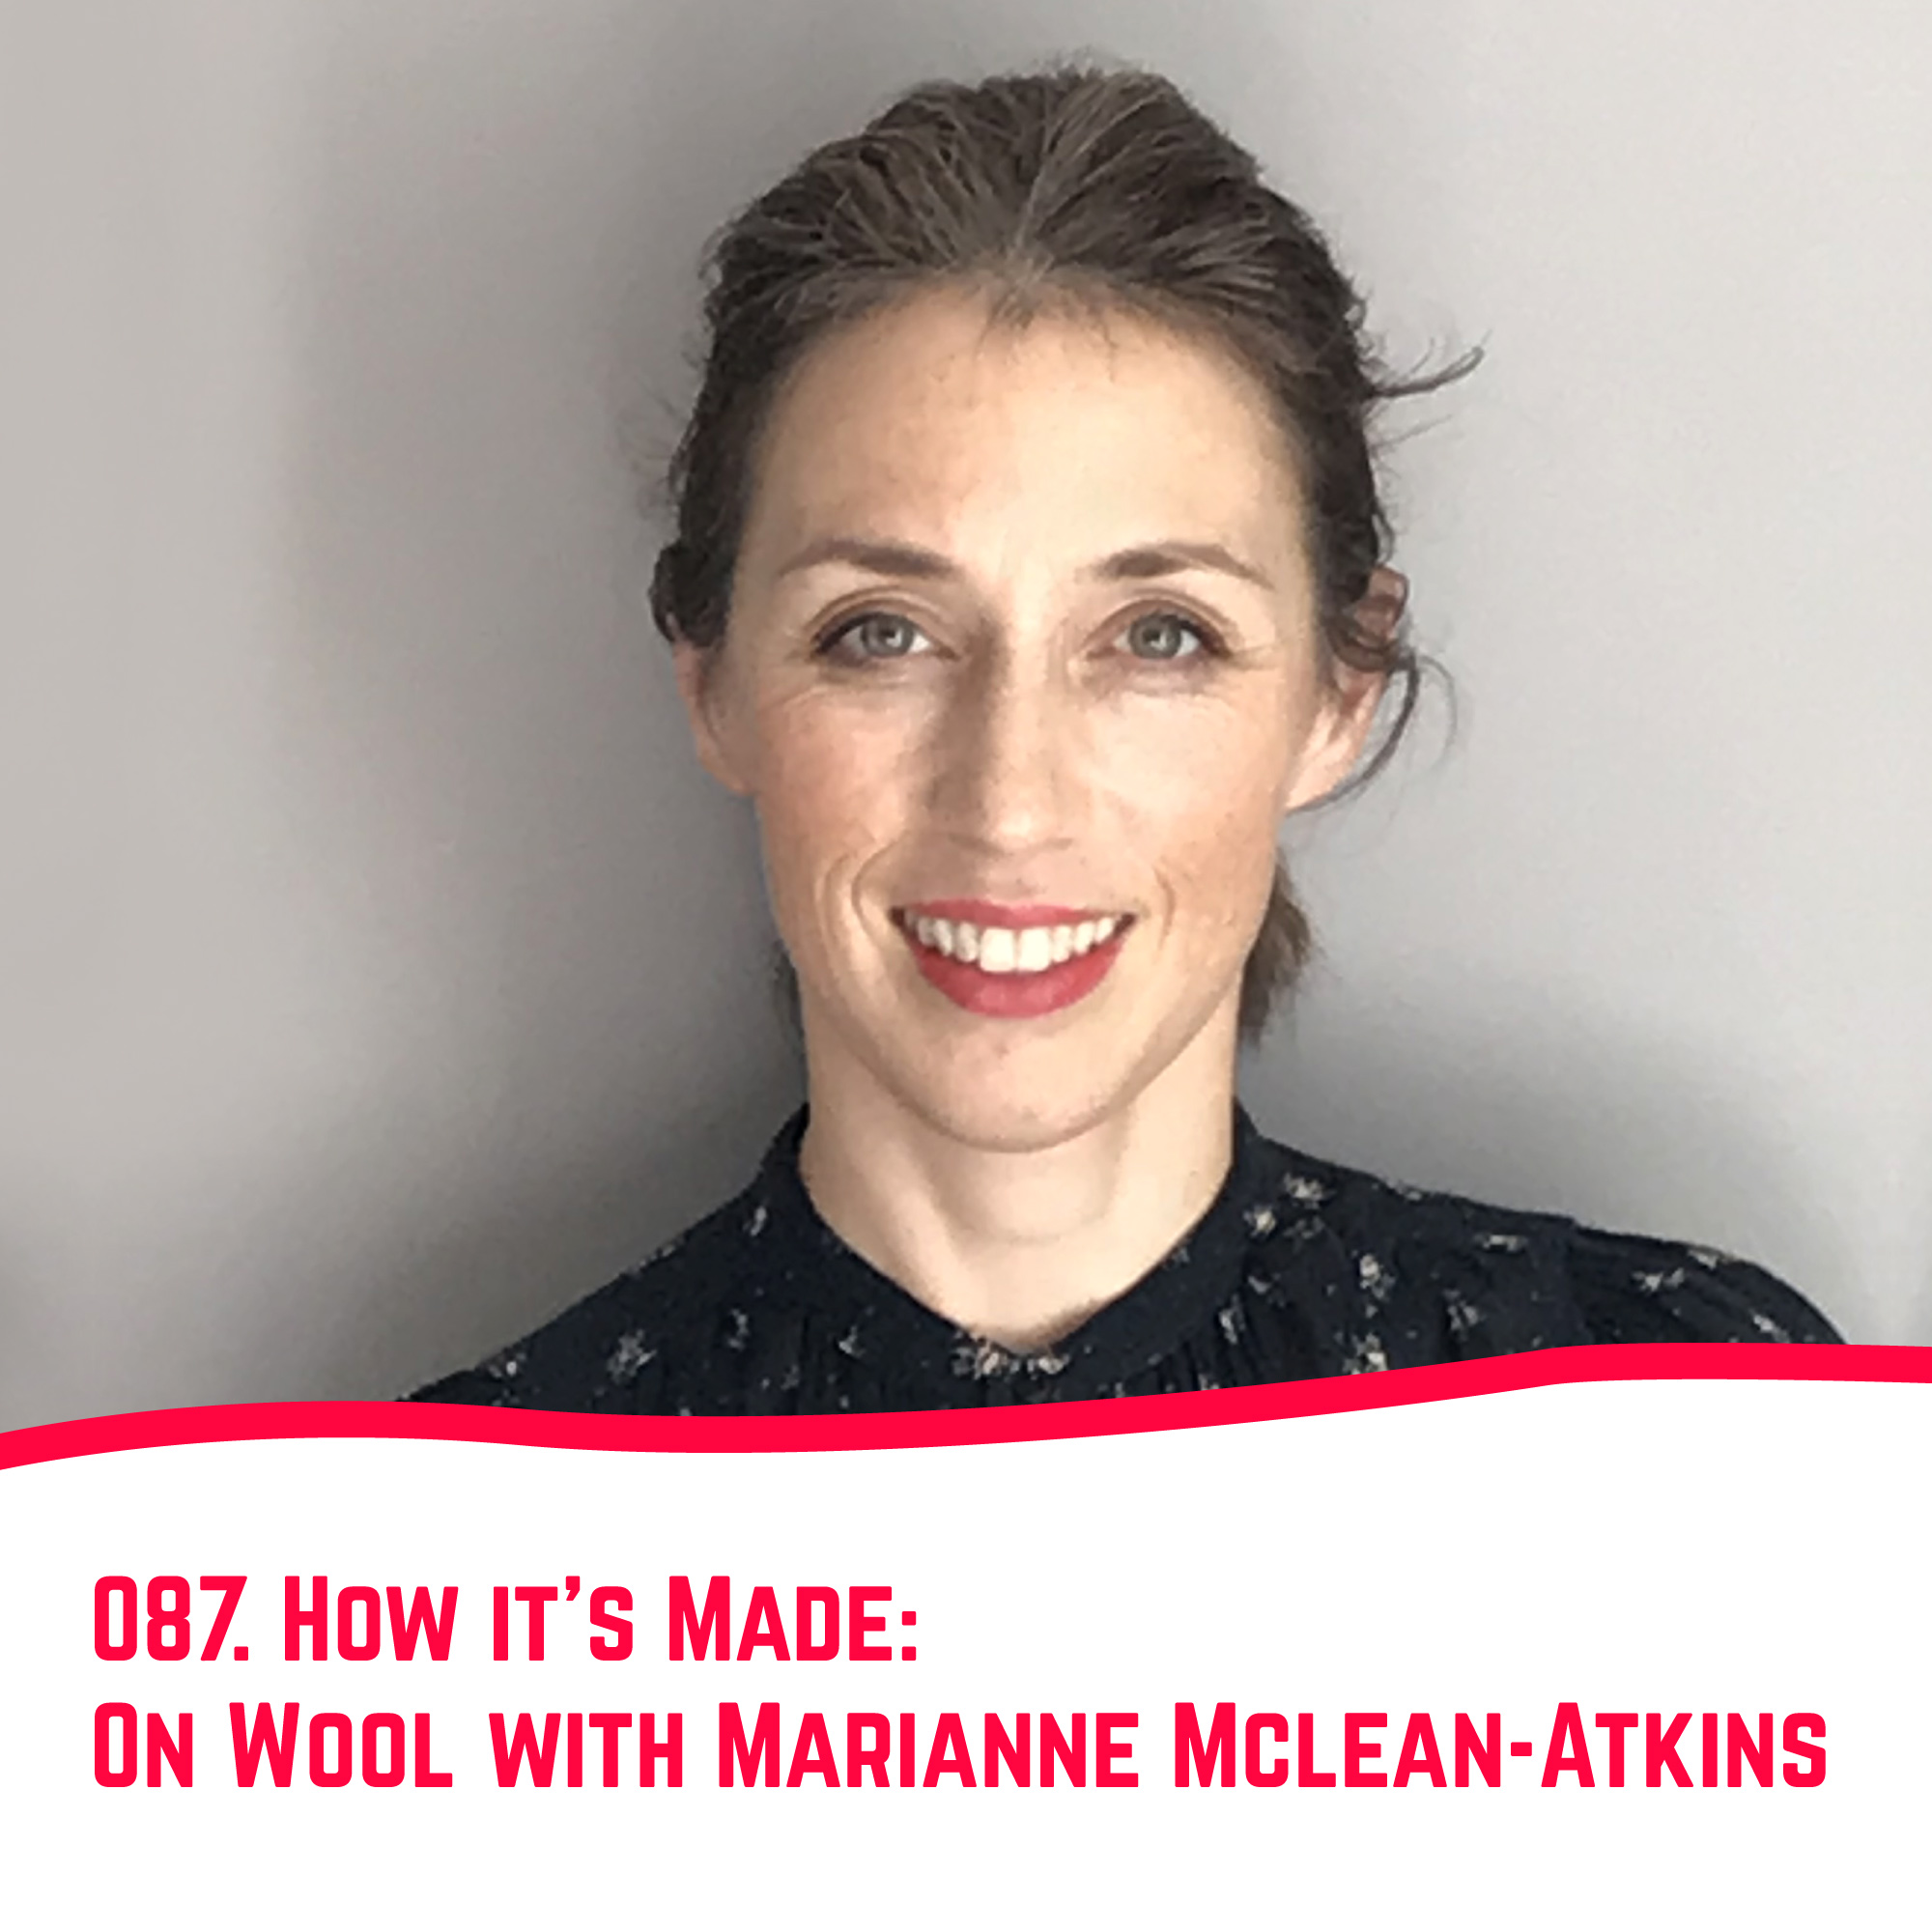 On Wool with Marianne Mclean-Atkins